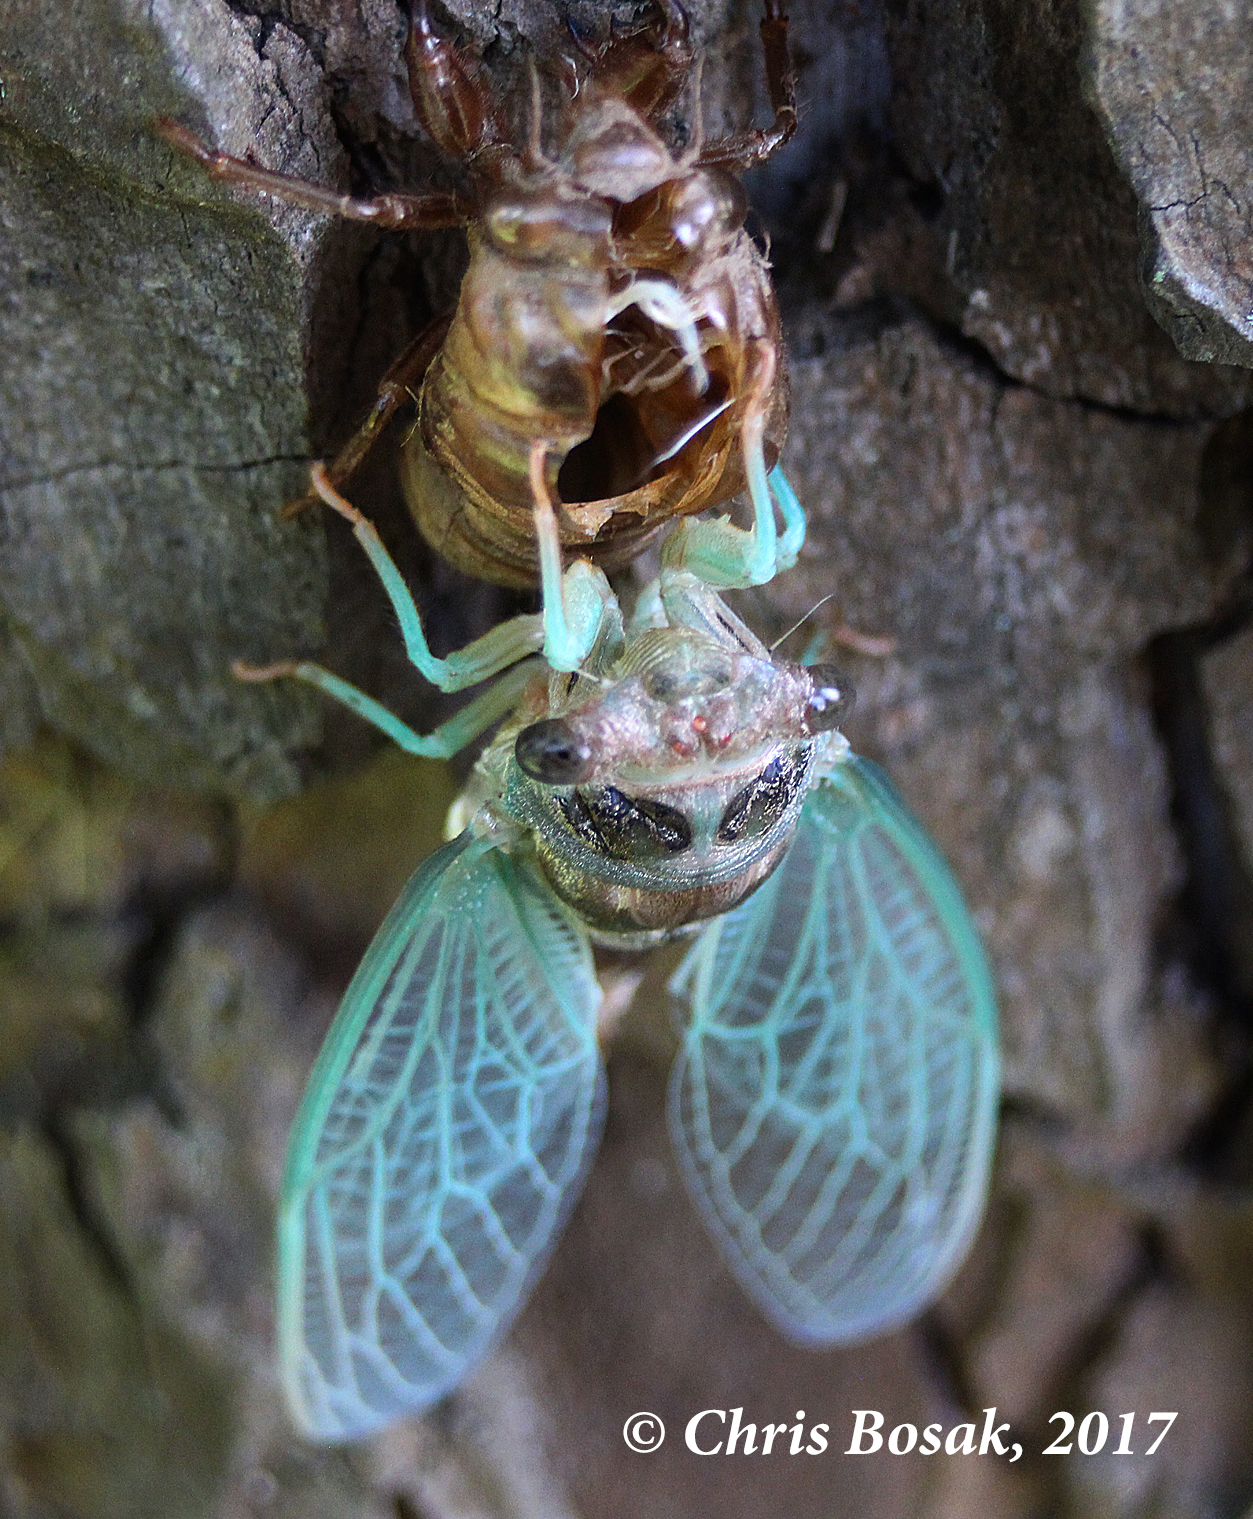 Photo by Chris Bosak A cicada emerges from its nymph exoskeleton on a tree in Danbury, Conn., summer 2017.